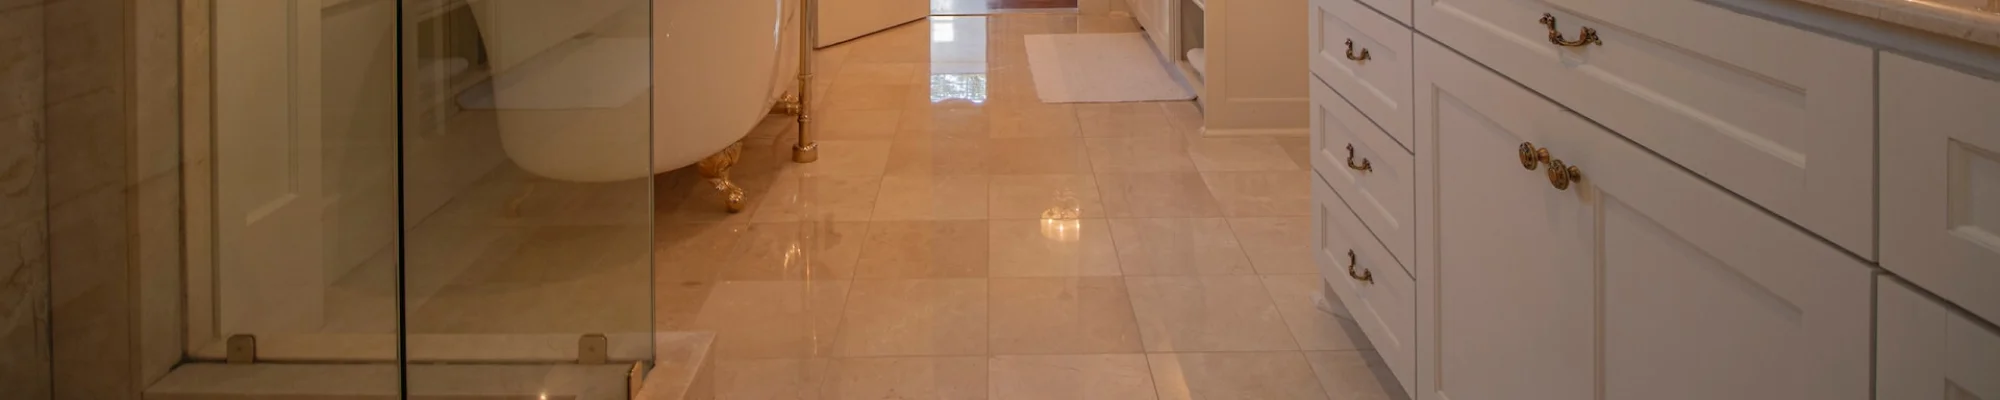 Learn about tile flooring from Johnson & Sons located in Alcoa, Knoxville or Oak Ridge, TN